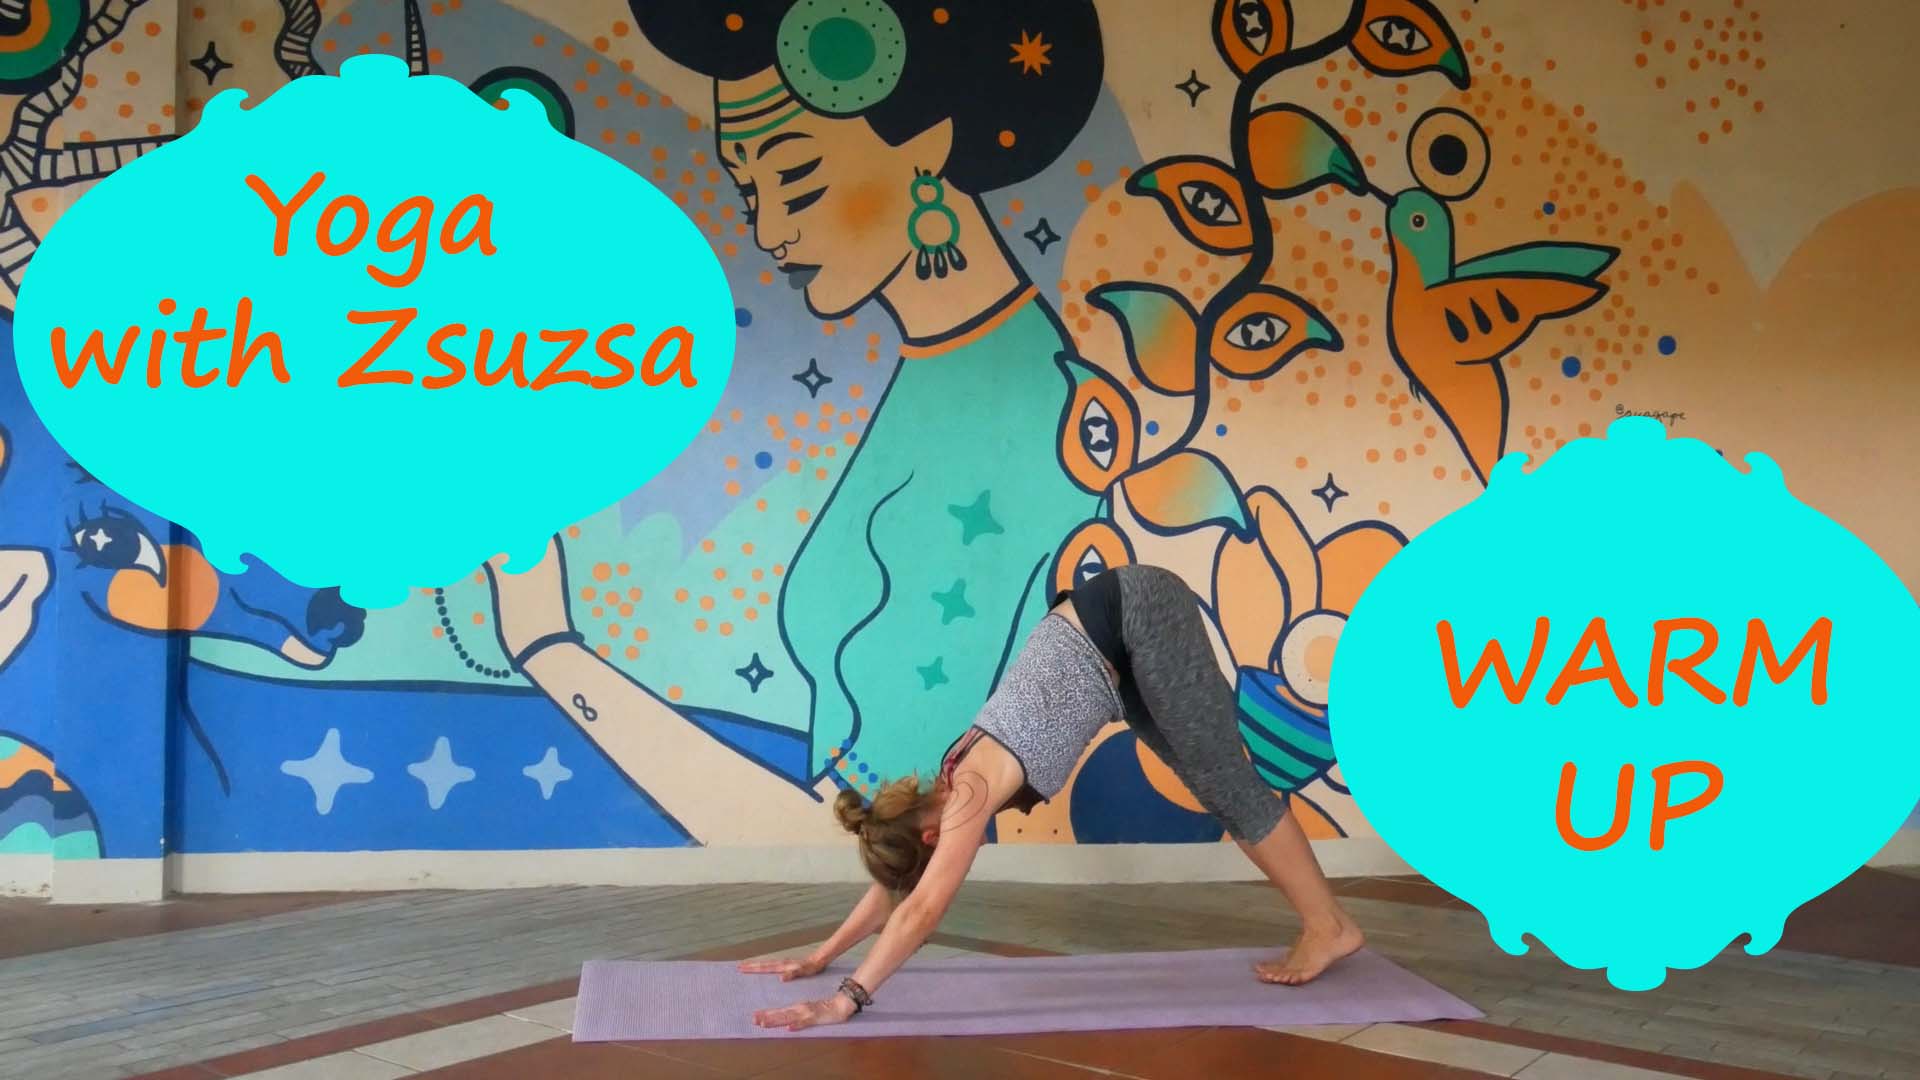 Online yoga practice for warm up